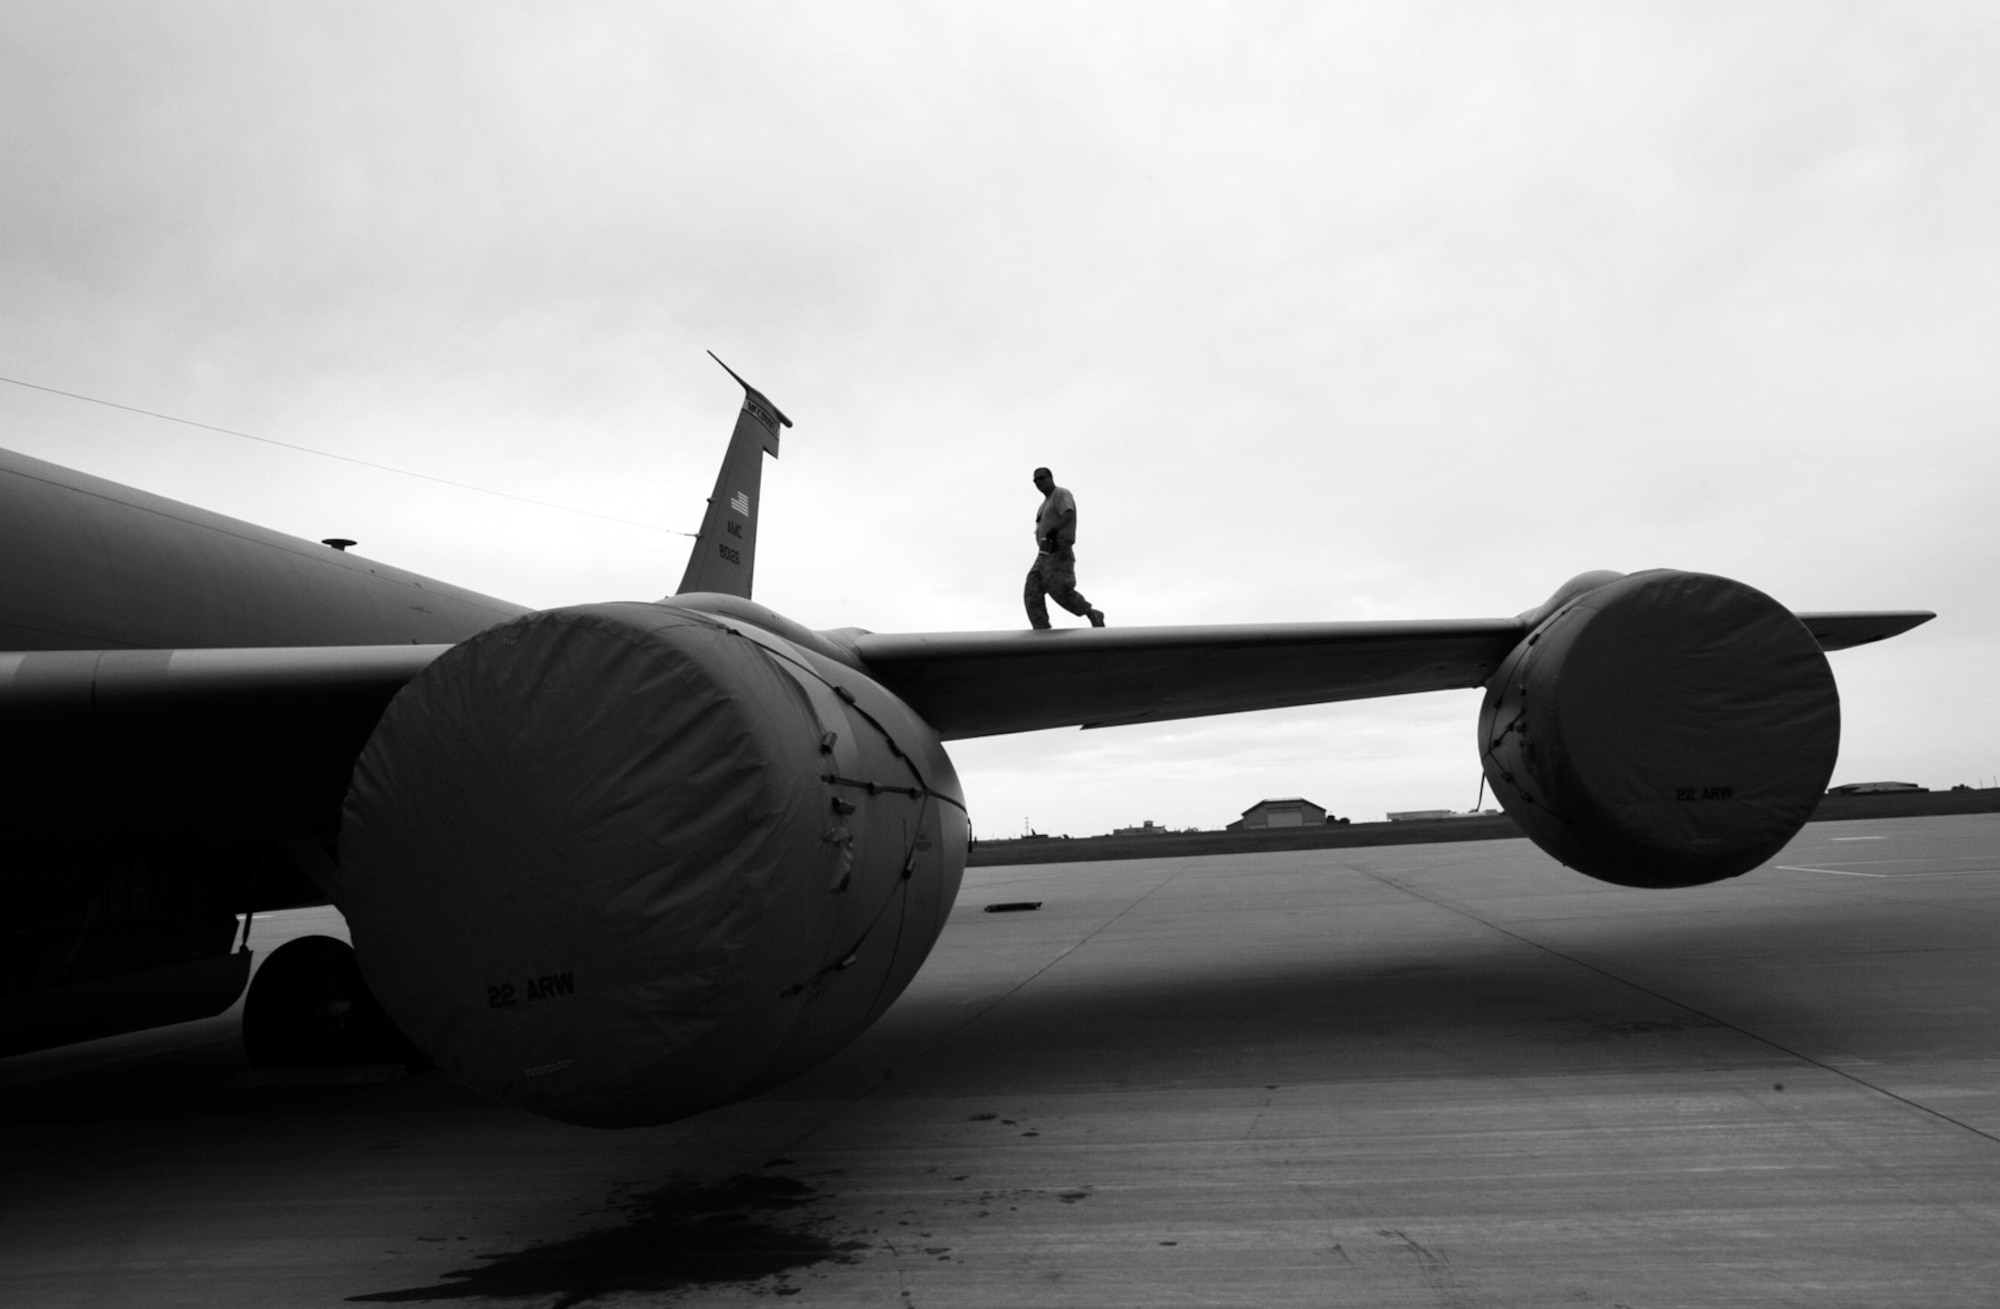 Tech. Sgt. Billy Martin walks across the wing of a KC-135 Stratotanker Friday at McConnell Air Force Base, Kan., after finishing some final preparations for Air Mobility Command Rodeo 2009. Sergeant Martin, a Reservist assigned to the 931st Aircraft Maintenance Squadron, is part of a total-force team of Reservists and active-duty Airmen scheduled to depart for Rodeo 2009 on July 18. (U.S. Air Force photo/Tech. Sgt. Jason Schaap) 